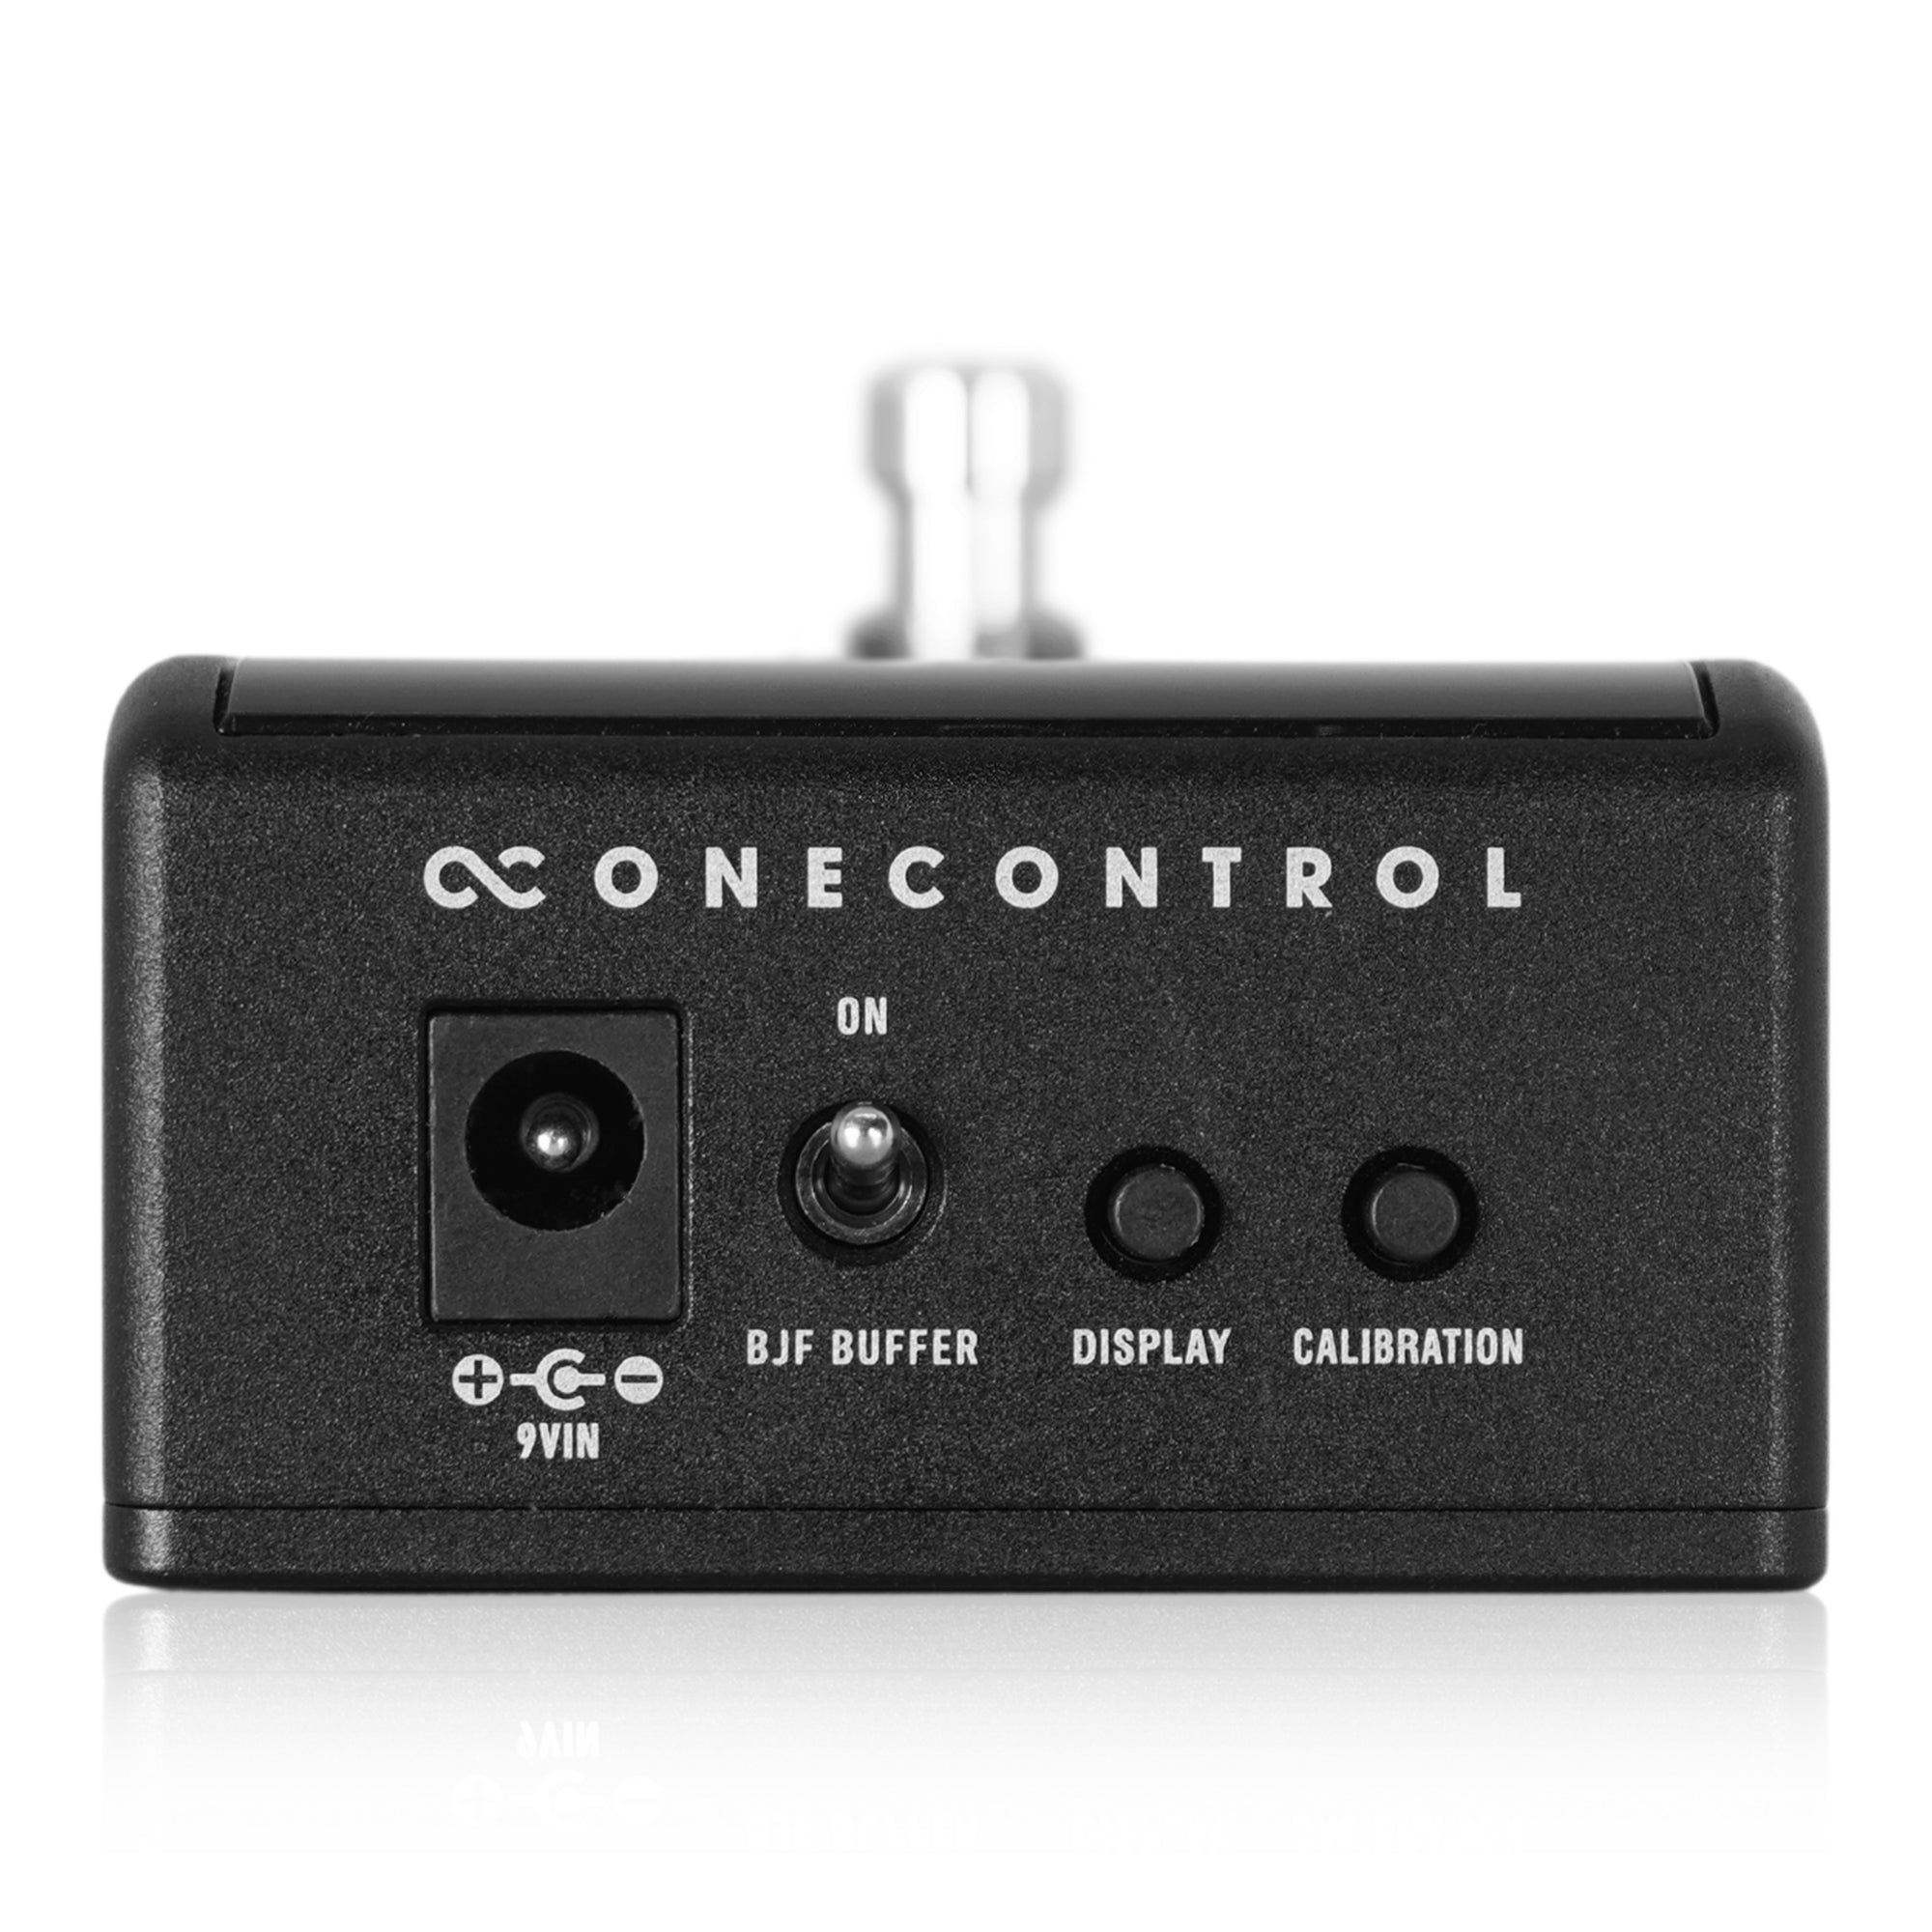 One Control LX Tuner with BJF BUFFER – OneControl